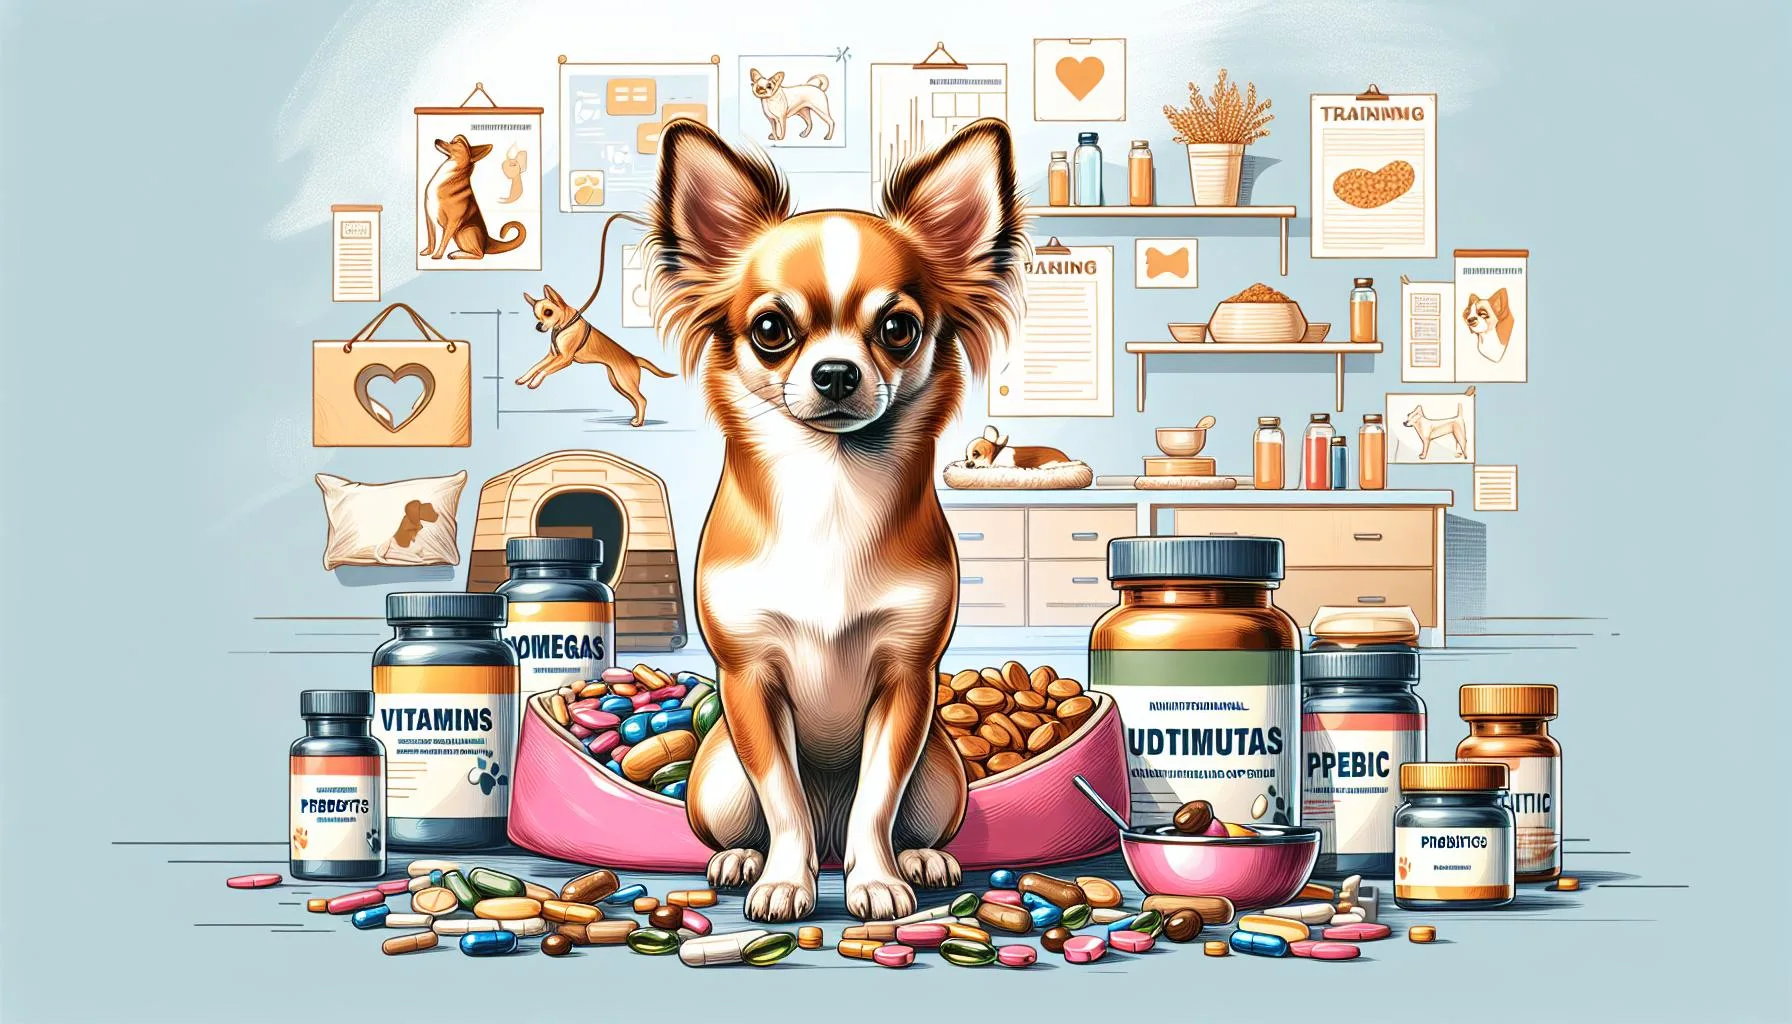 Enhance Your Chihuahuas Training with Nutritional Supplements!